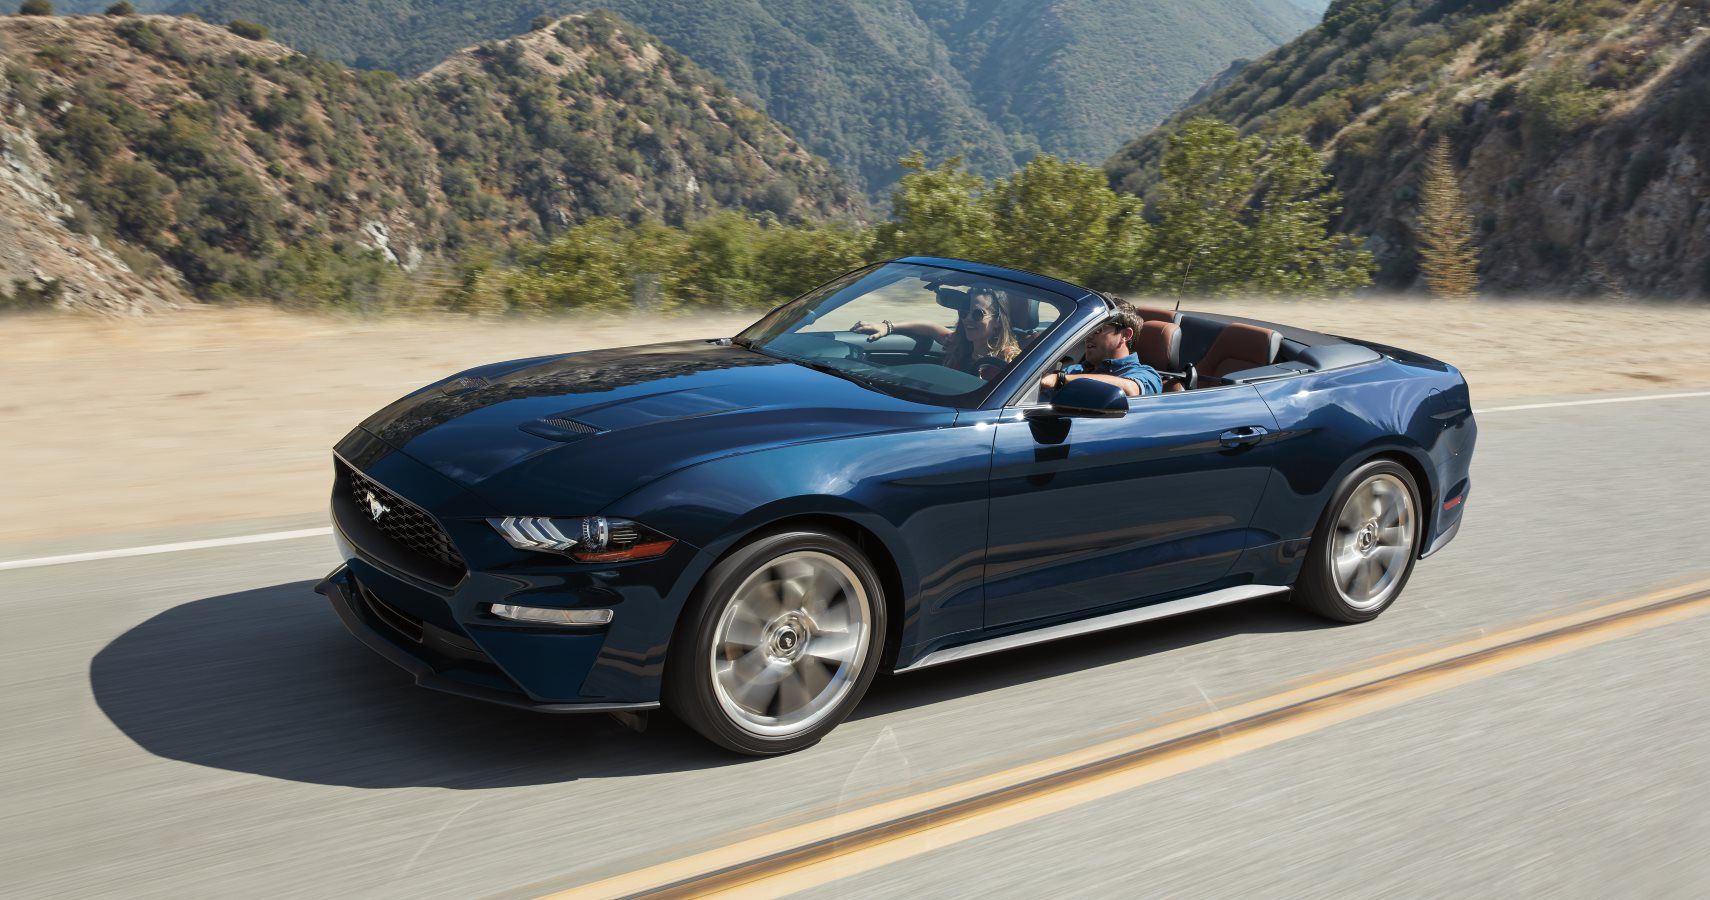 2019 Ford Mustang Ecoboost Convertible - Kona Blue